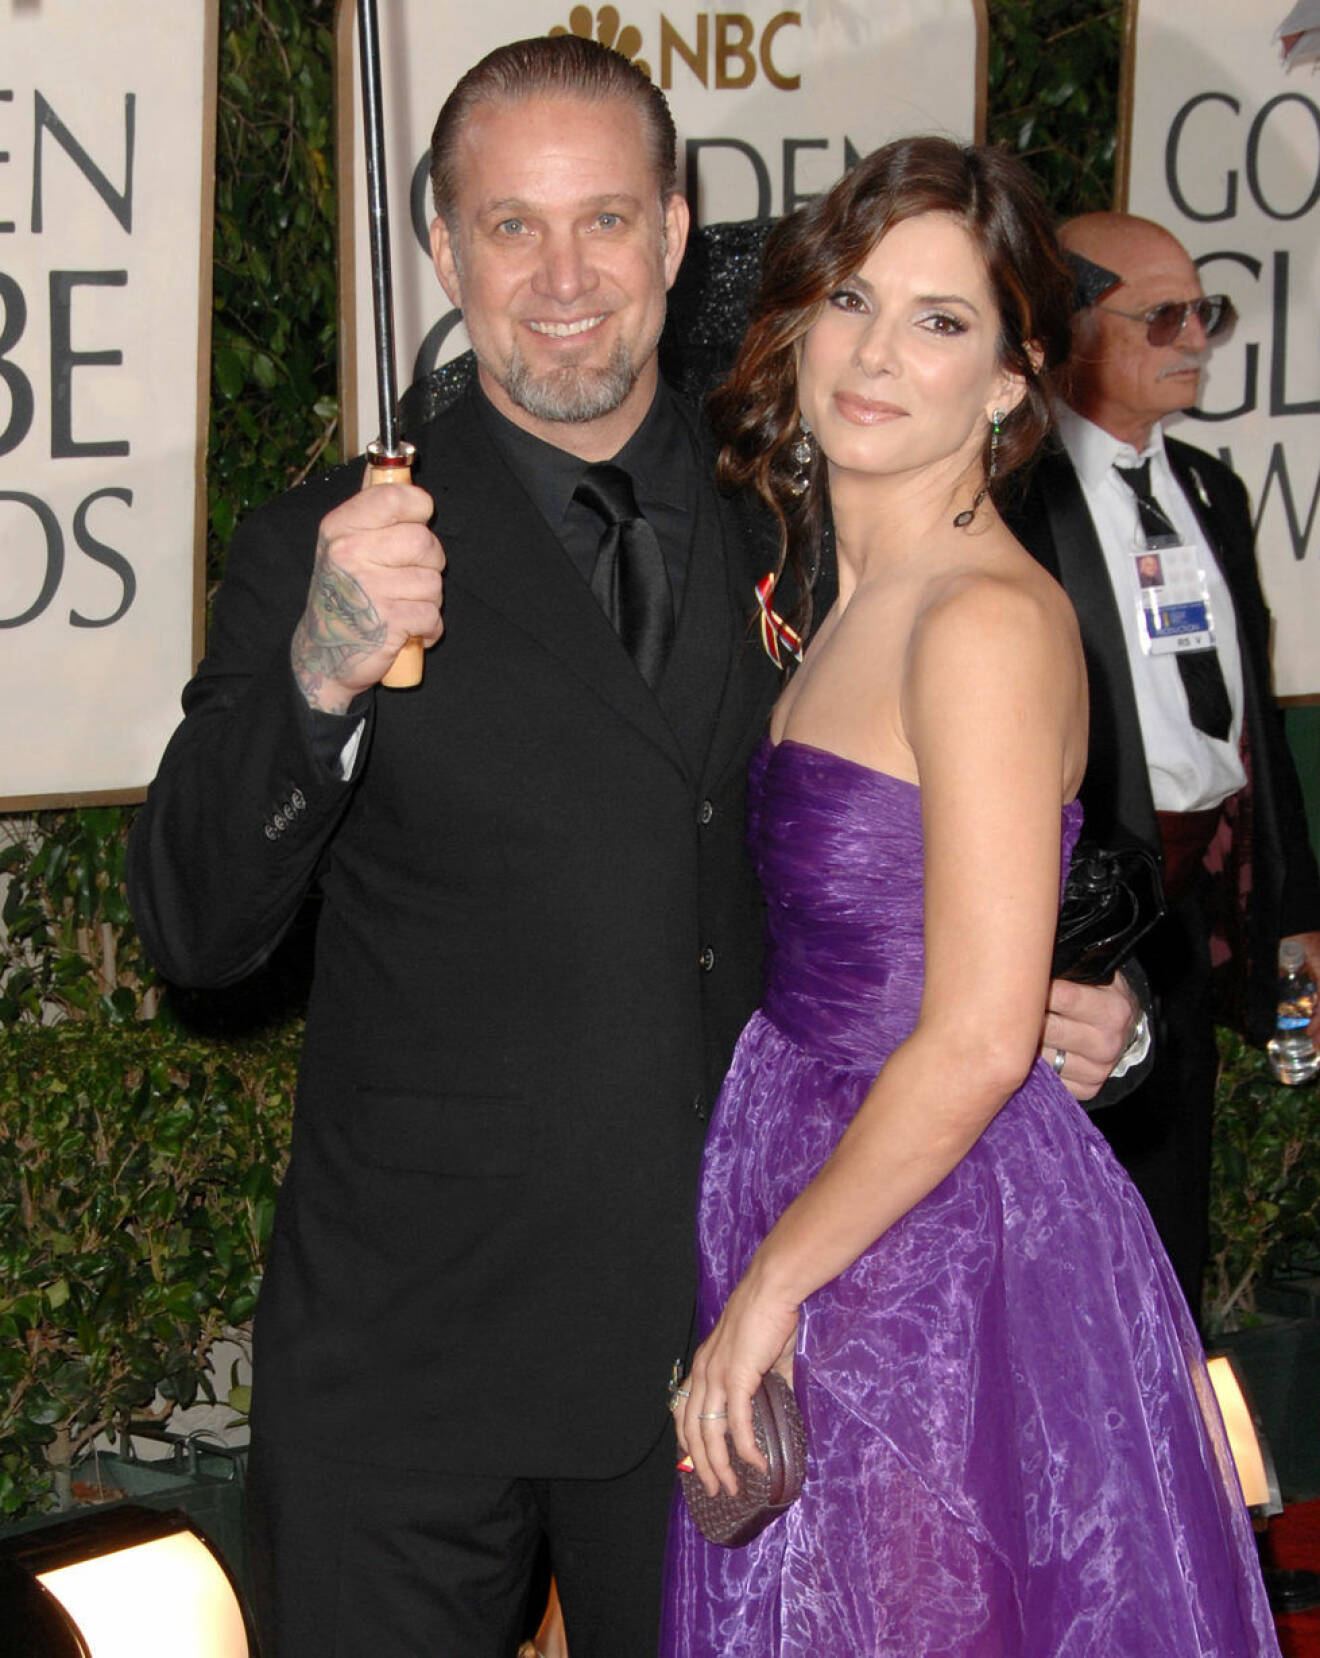 The 67th Annual Golden Globe Awards, Arrivals, Beverly Hilton Hotel, Los Angeles, America - 17 Jan 2010